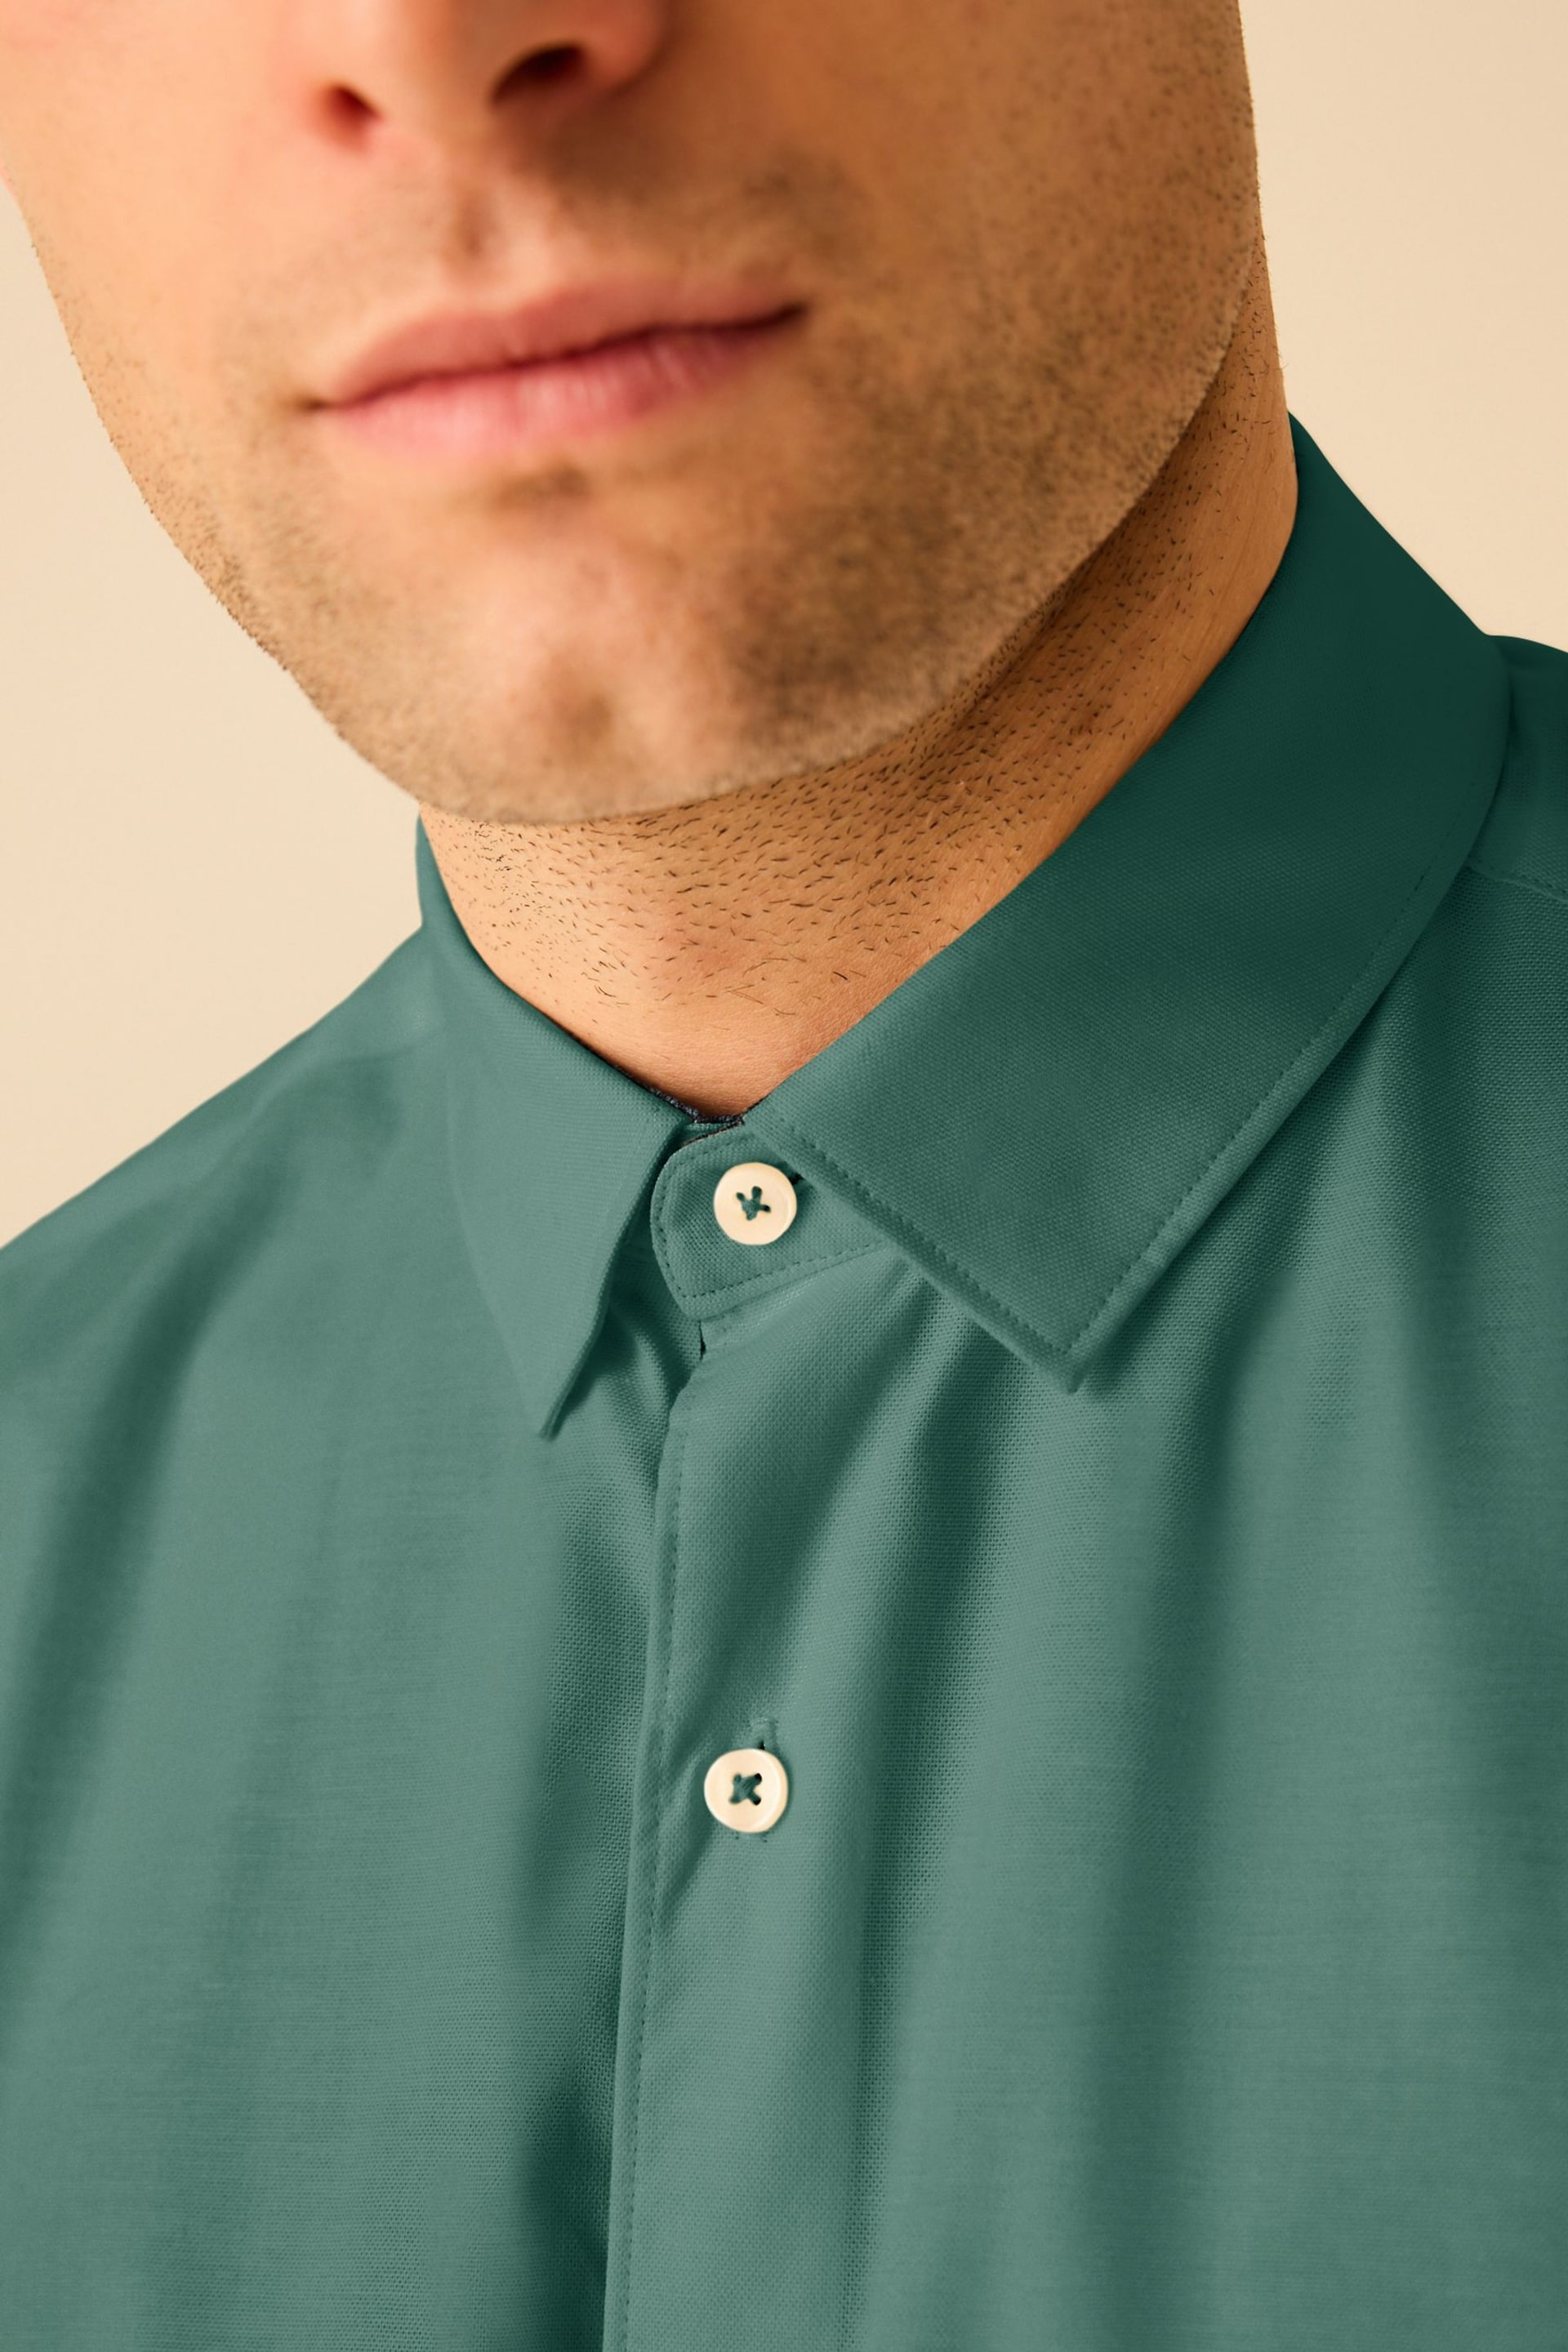 Blue Stretch Oxford Long Sleeve Shirt - Image 5 of 9